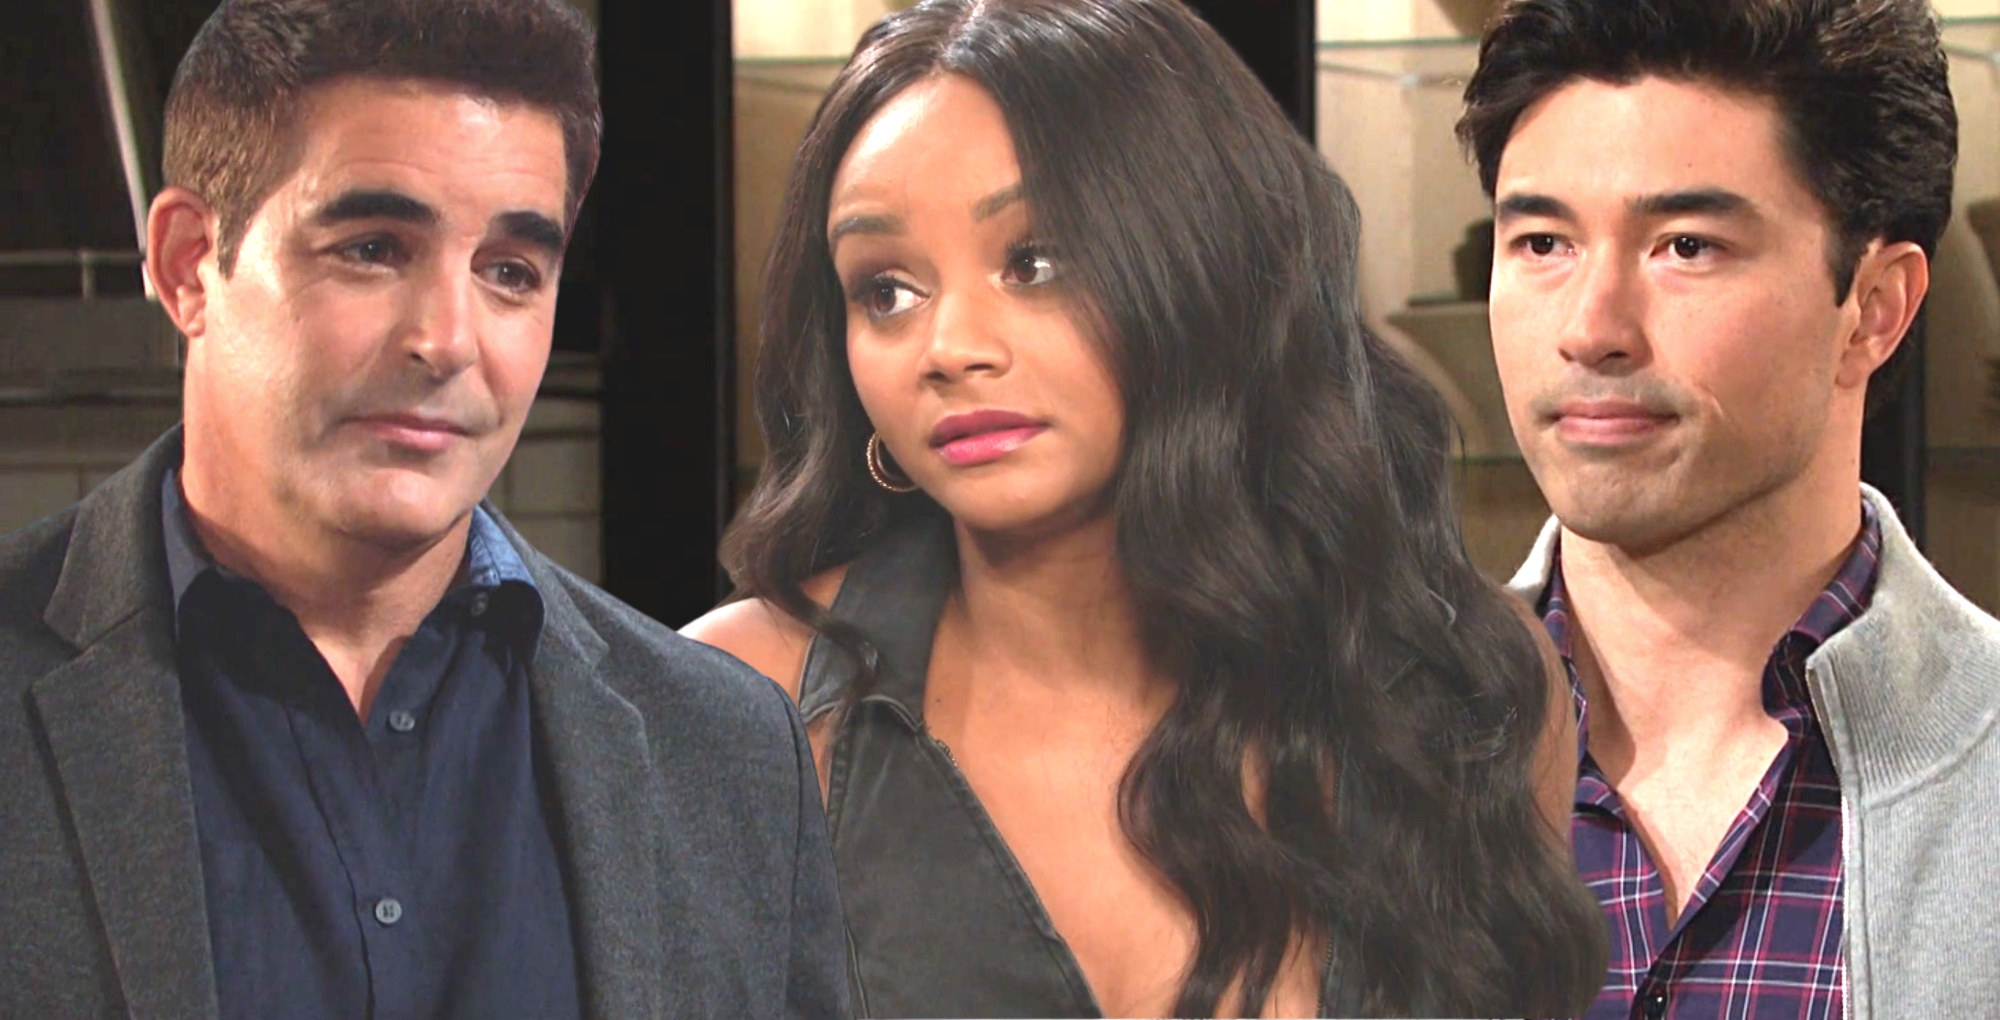 rafe hernandez, chanel dupree, and li shin of days of our lives.